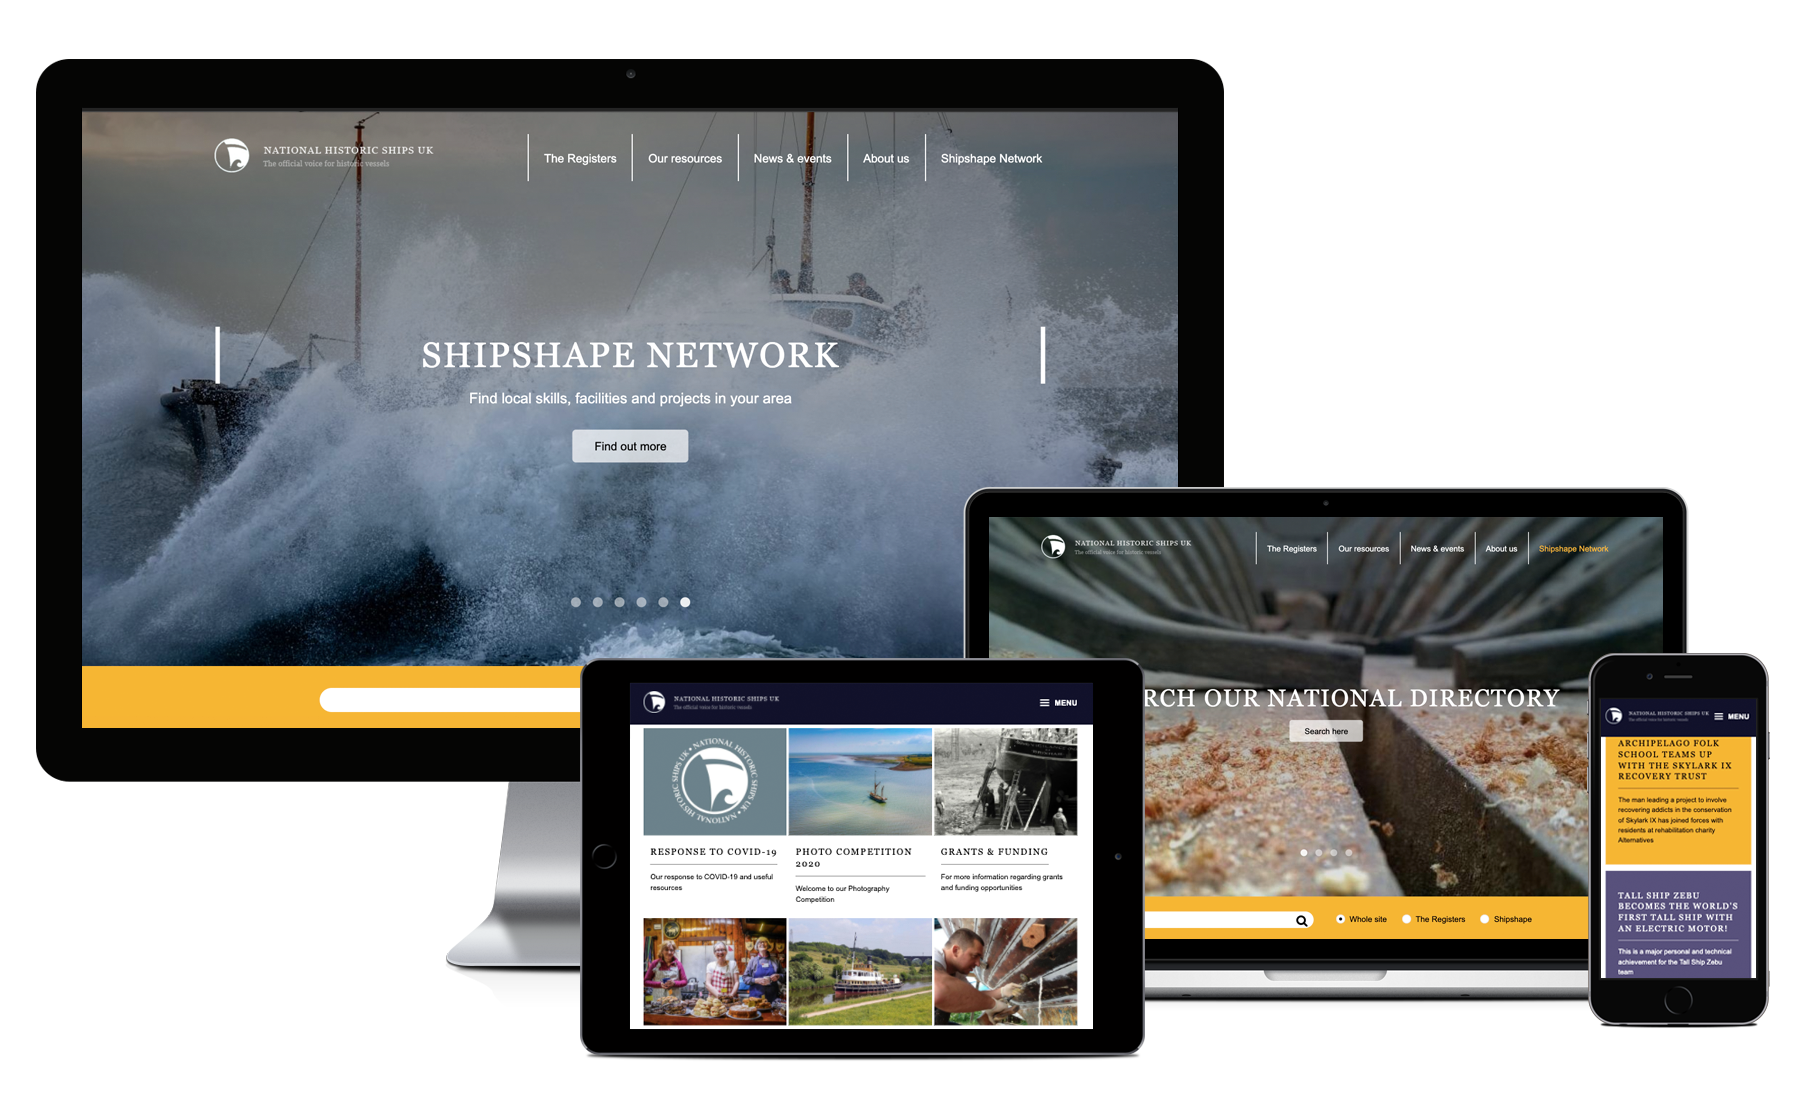 Desktop, Macbook, tablet and iPhone showing pages from National Historic Ships’ Website